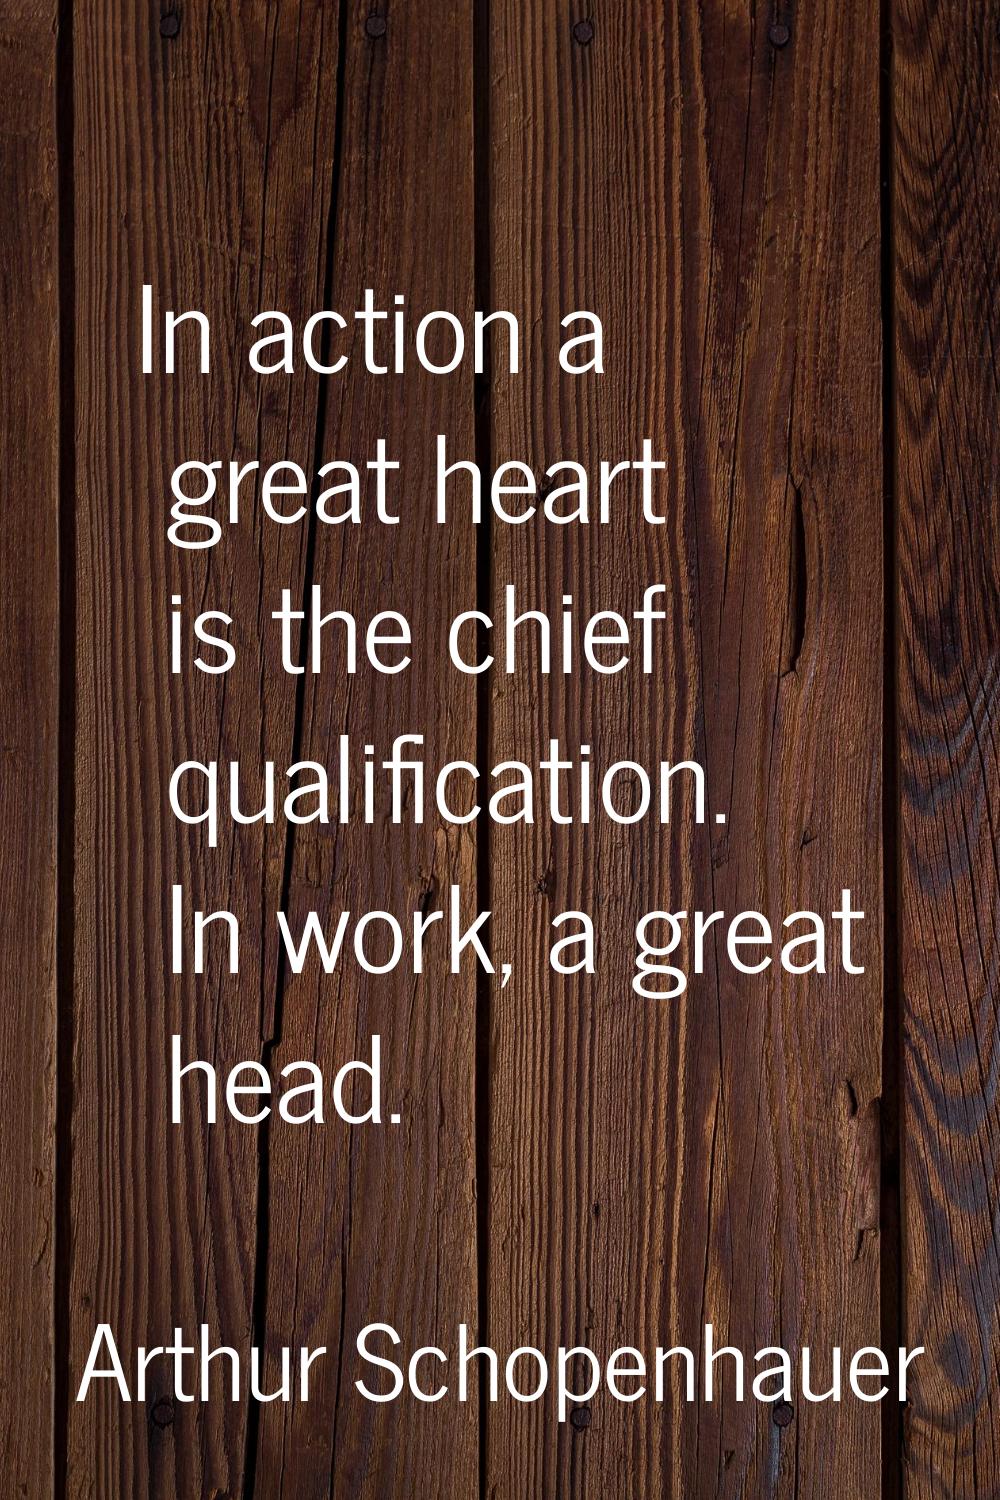 In action a great heart is the chief qualification. In work, a great head.